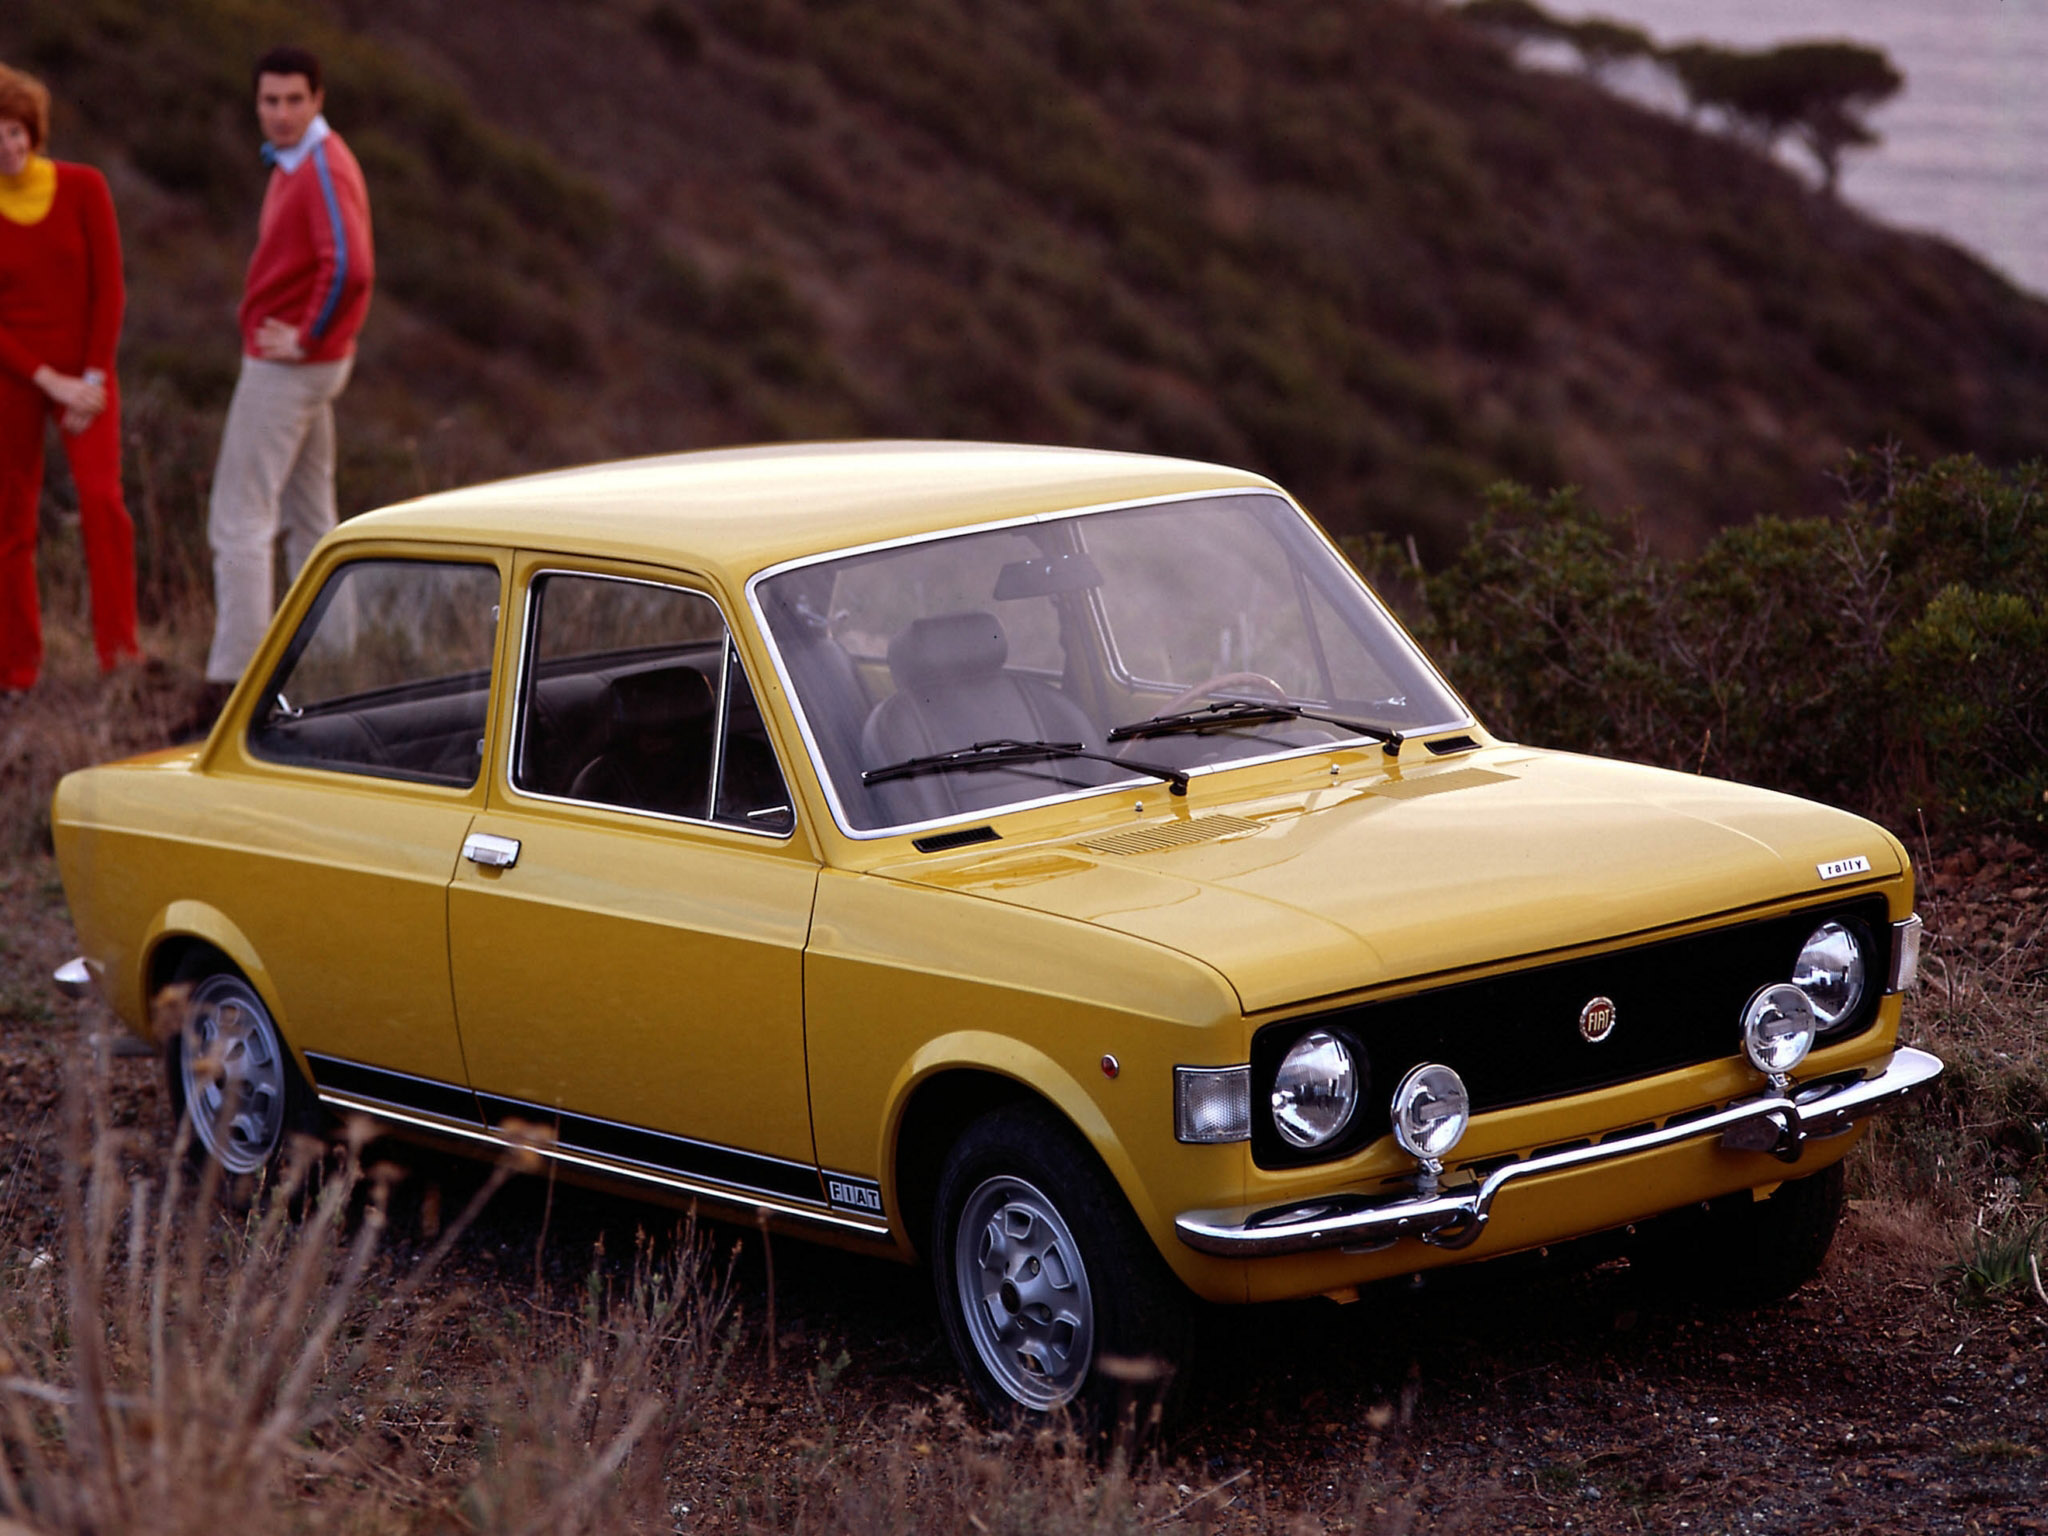 Fiat 125 Wagon: Photo gallery, complete information about model ...